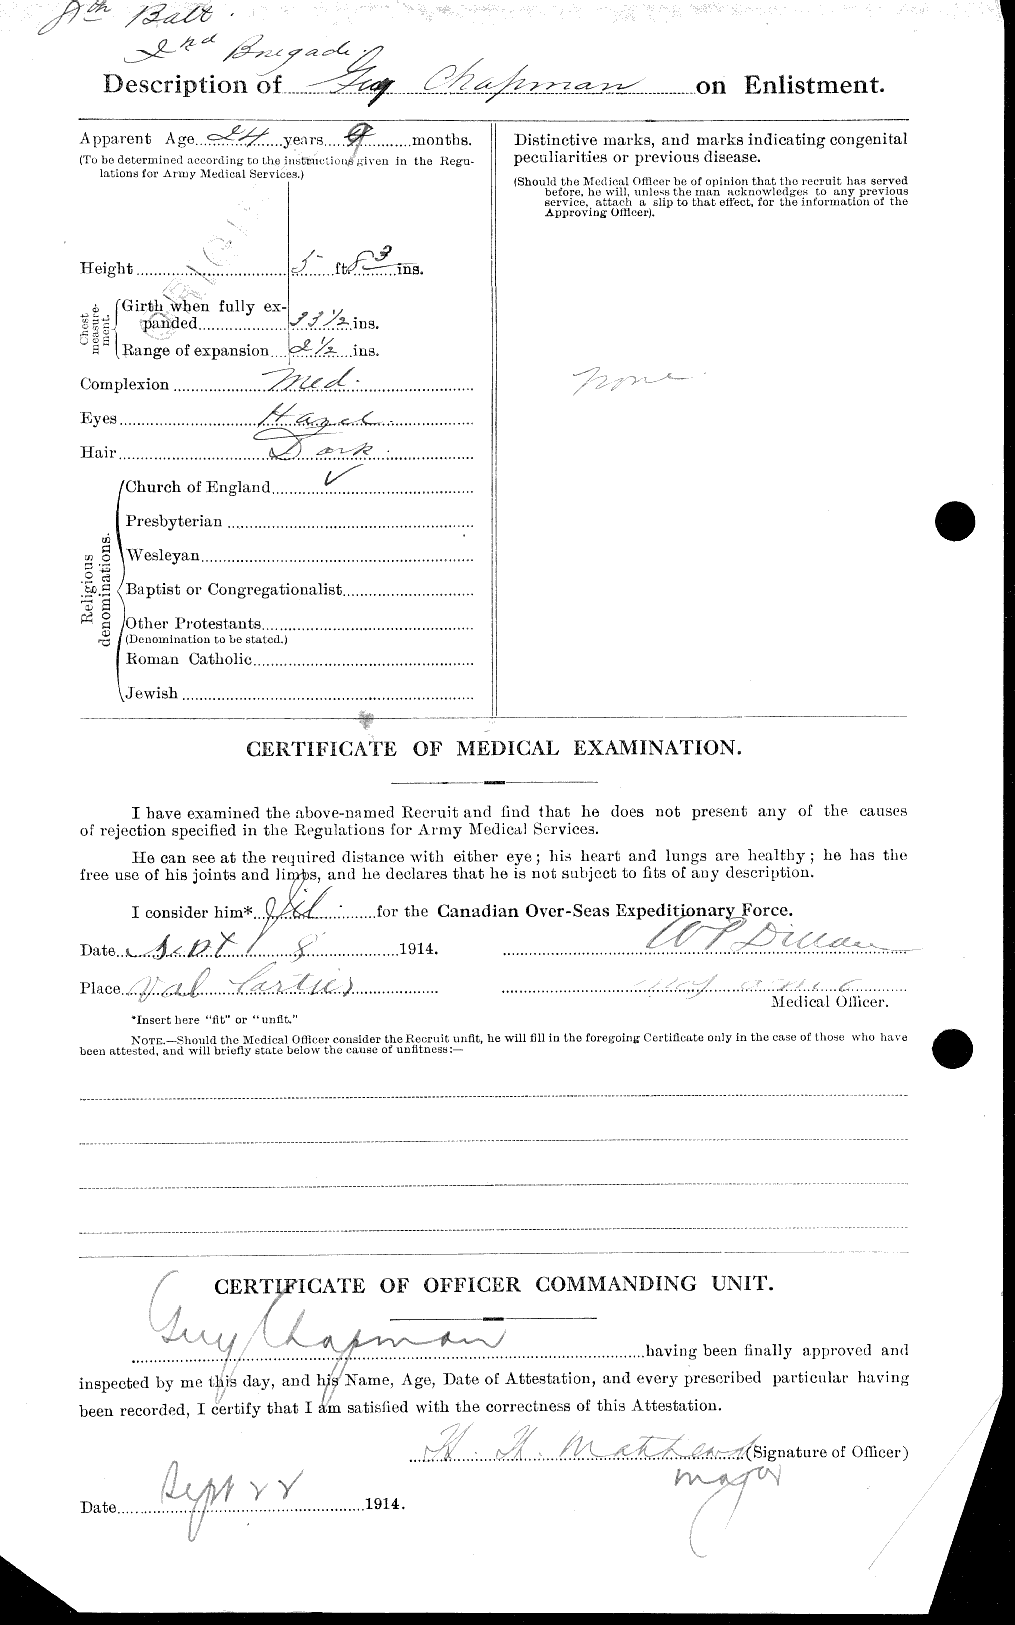 Personnel Records of the First World War - CEF 014669b